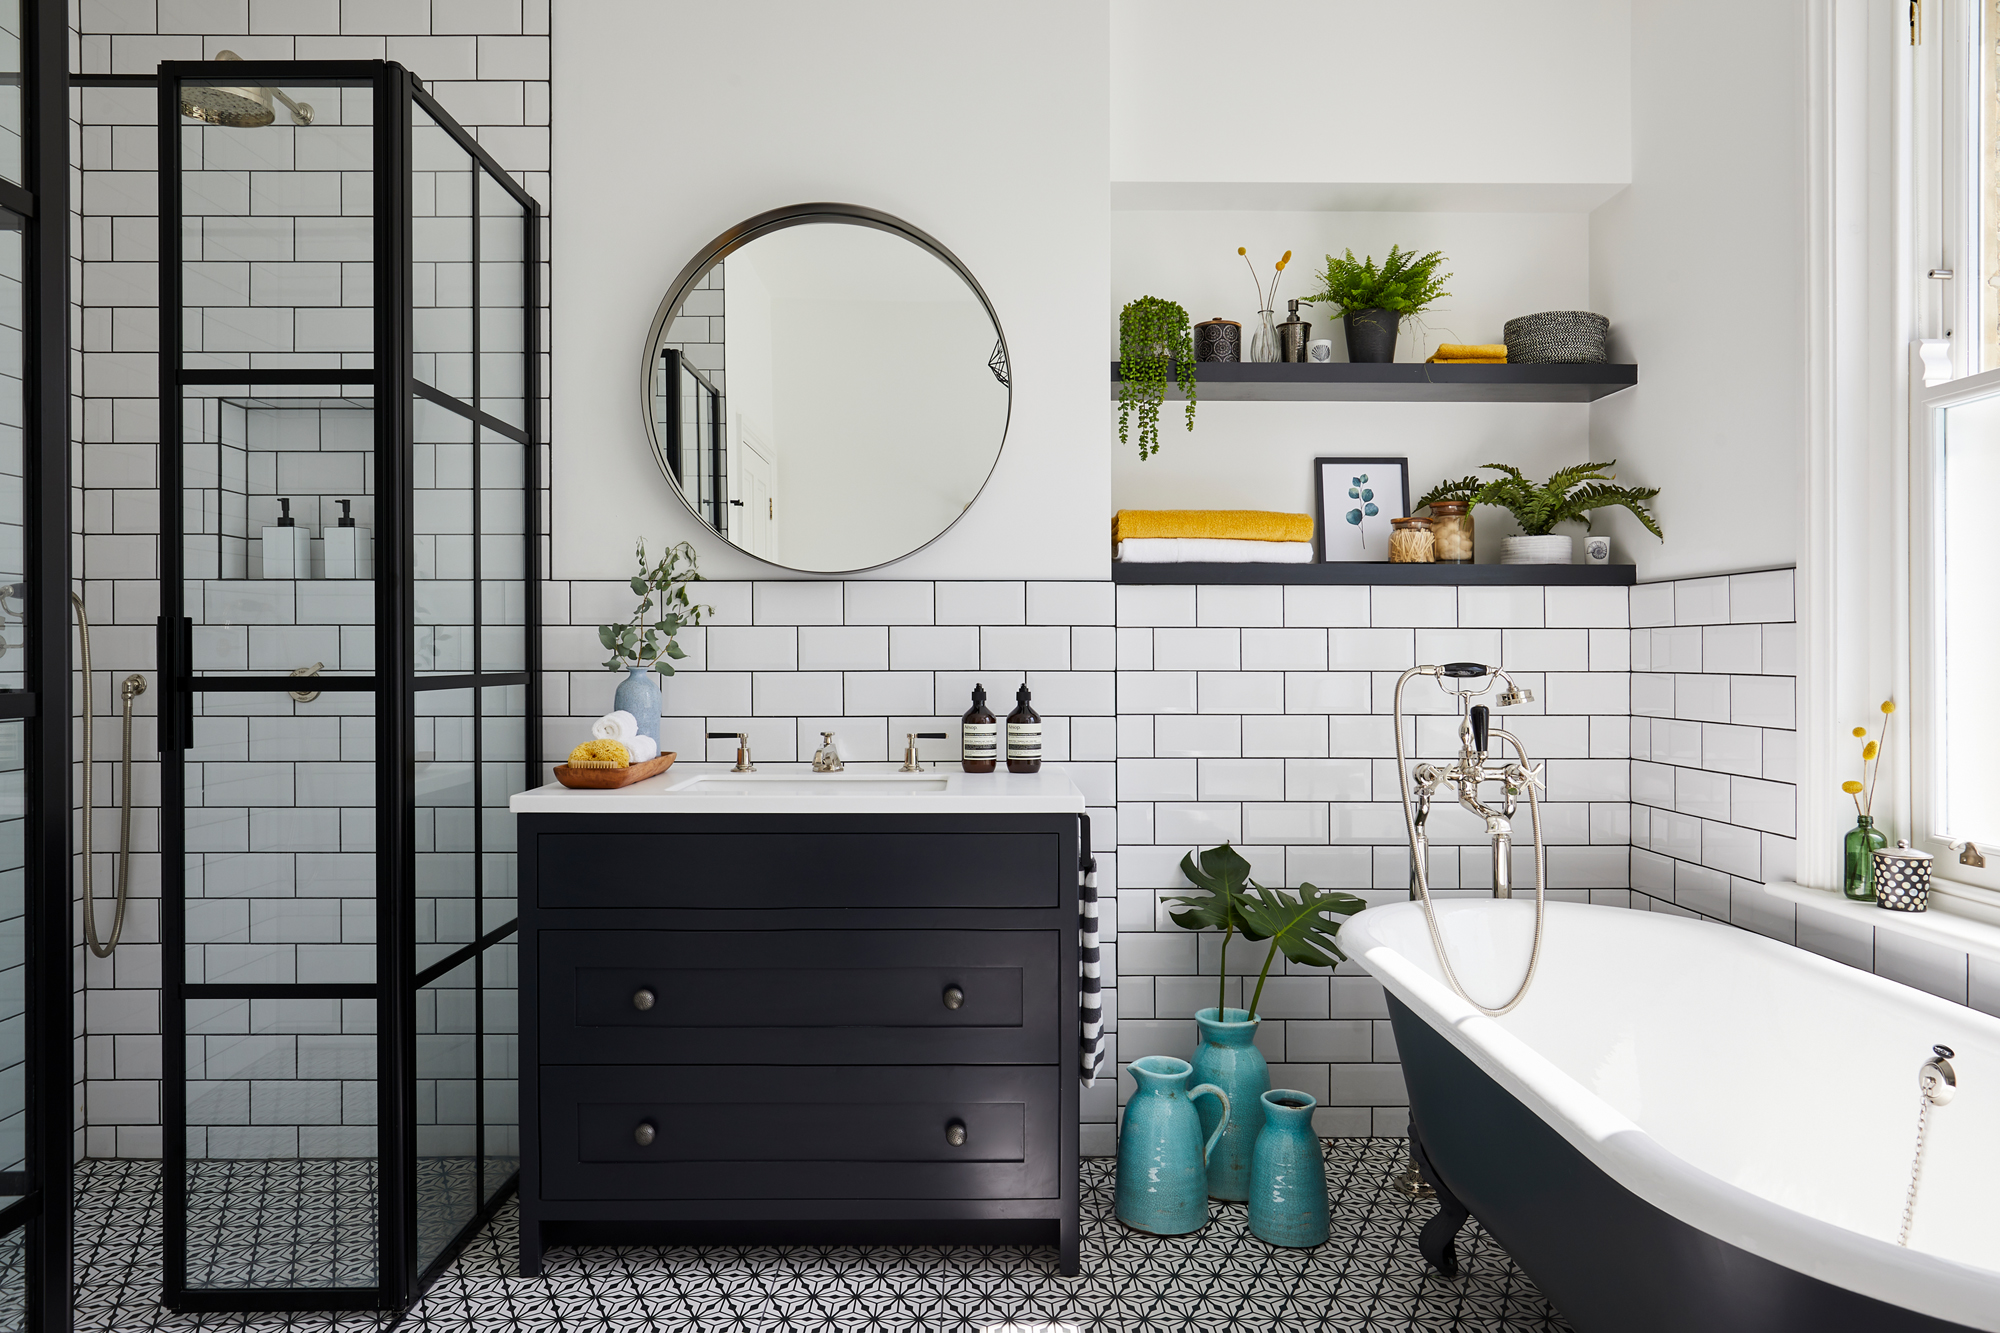 New Homeowners Guide: 10 Tips In Decorating Your Bathroom